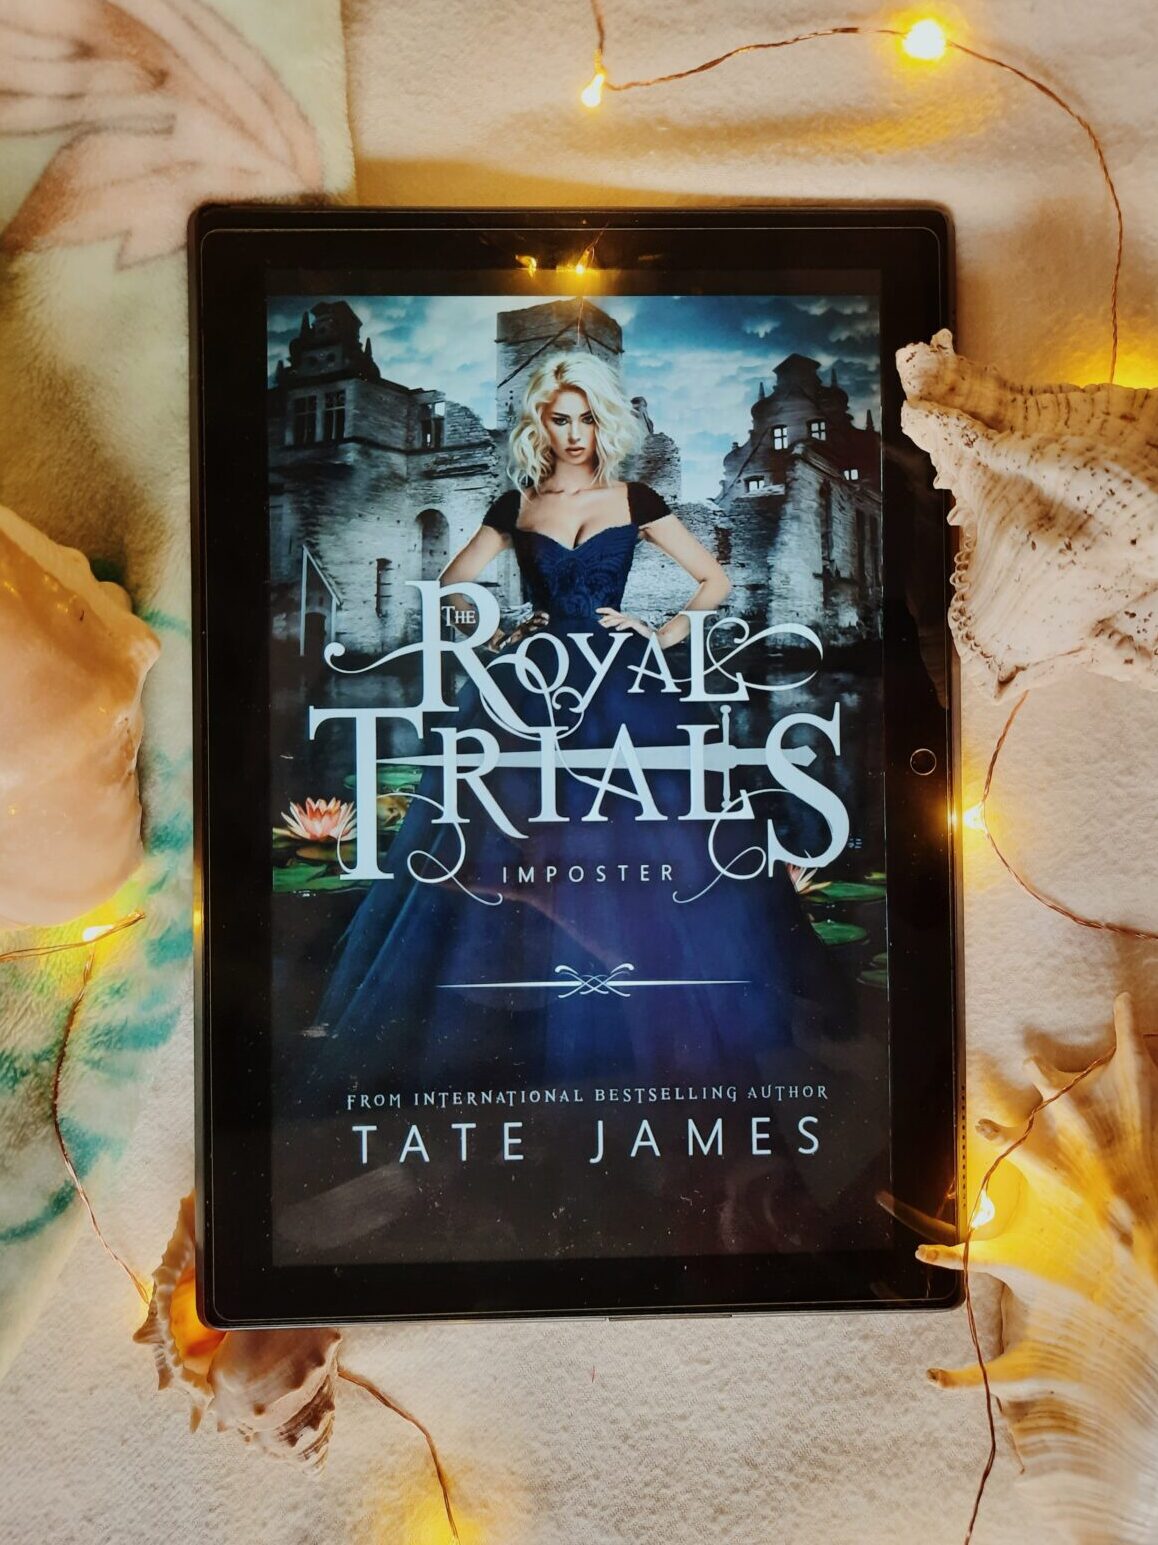 The Royal Trials Series Review. Imposter by Tate James